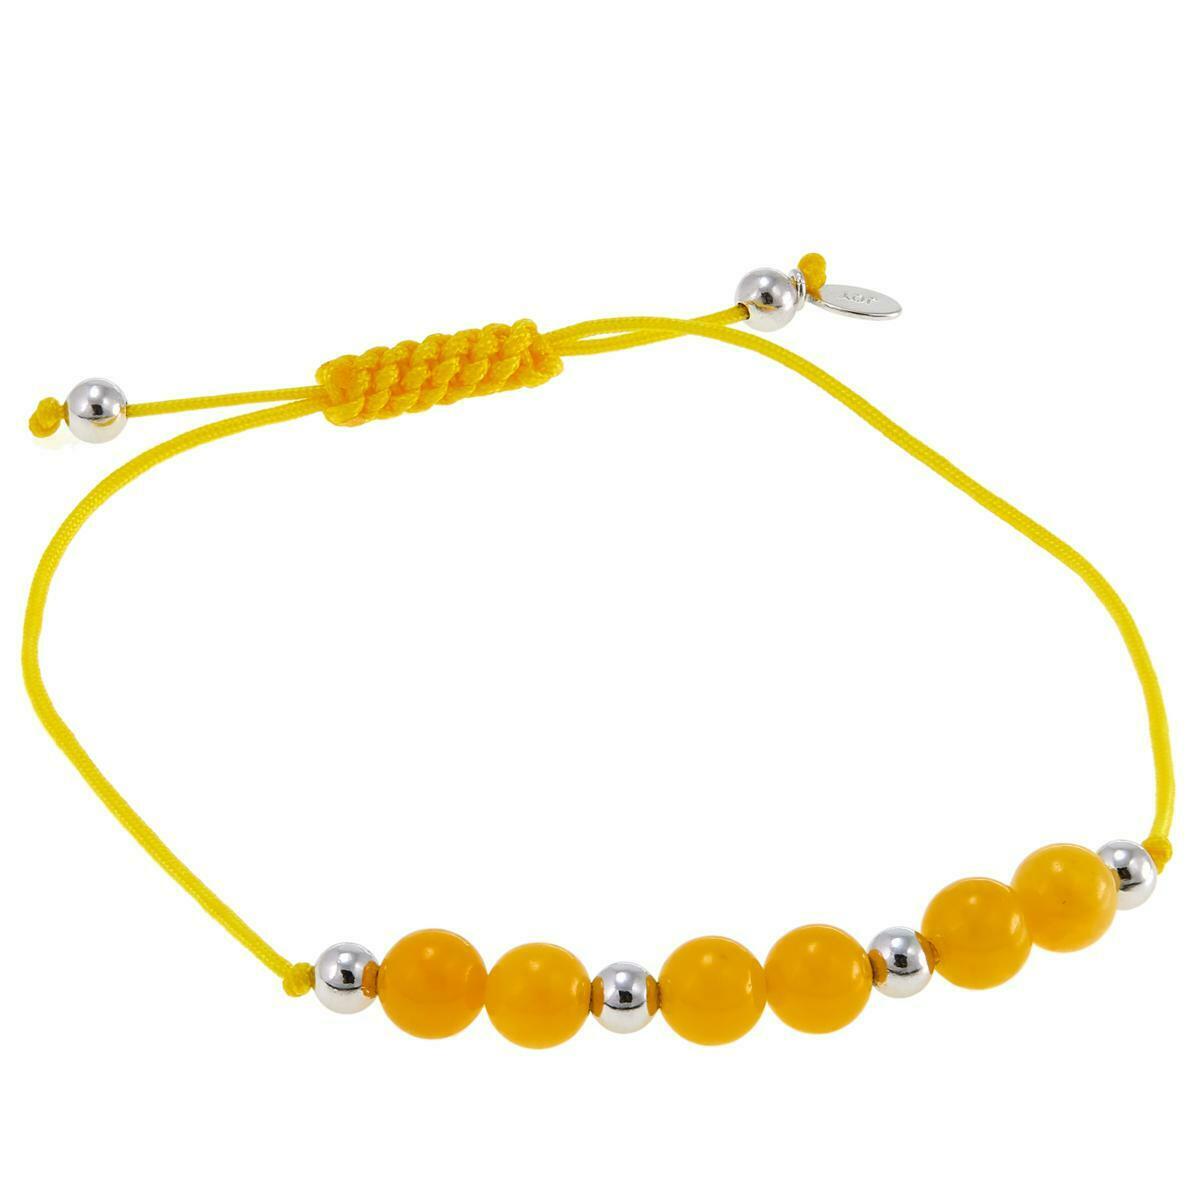 Jade of Yesteryear Adjustable Yellow Jade Bead Macrame Bracelet, Fits Elevate your wrist with the vibrant beauty of the Jade of Yesteryear Adjustable Yellow Jade Bead Macrame Bracelet. This bracelet not only showcases the radiant charmJewelry & Watches:Fine Jewelry:Fine Bracelets:GemstoneYesteryear Adjustable Yellow Jade Bead Macrame Bracelet, Fits Sm - LargeDuhaas